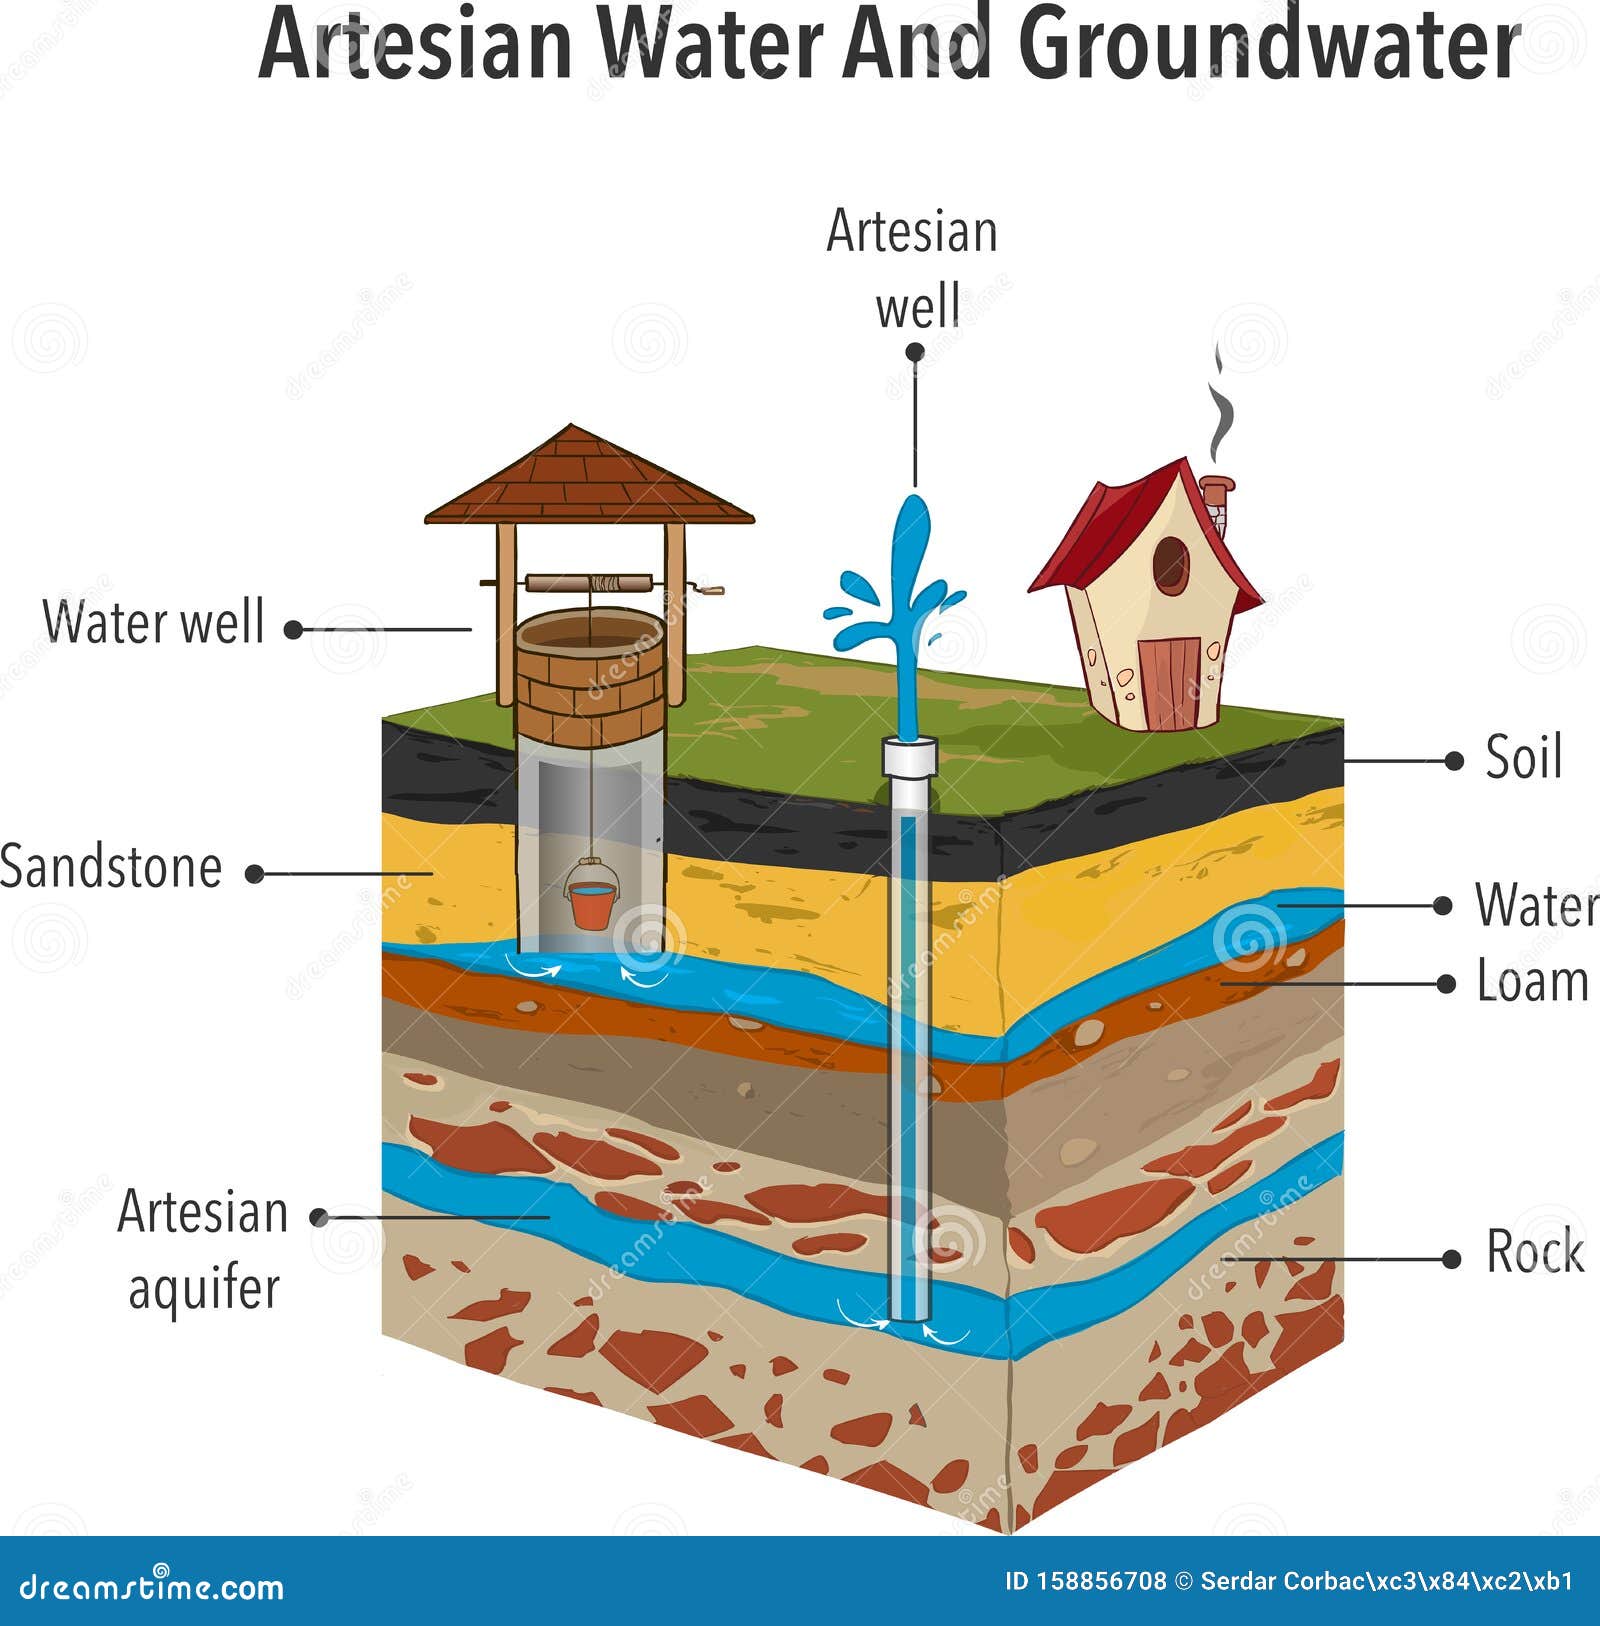 artesian water and groundwater  